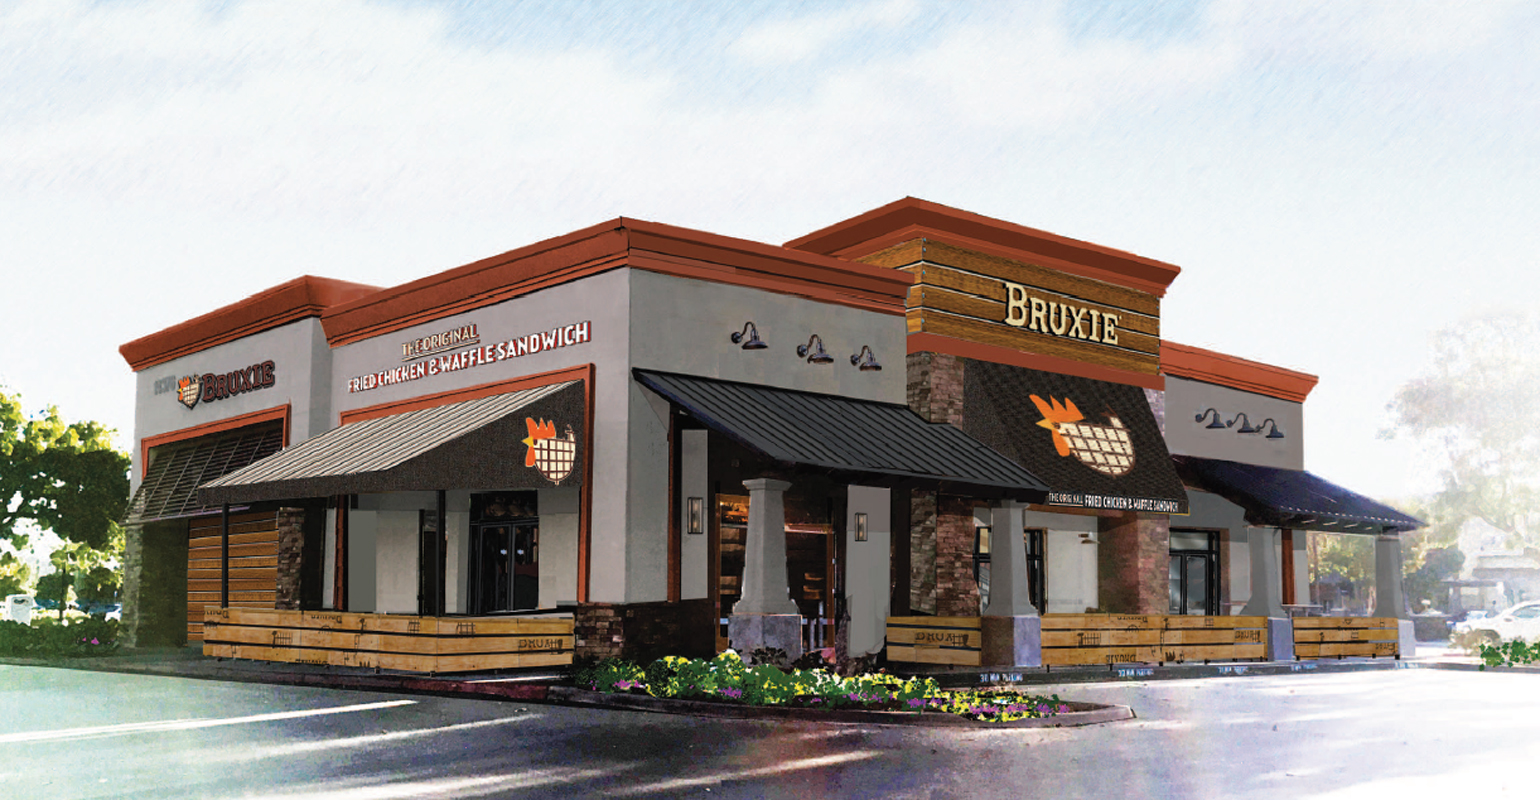 With new ownership, waffle sandwich chain Bruxie gets ready to grow